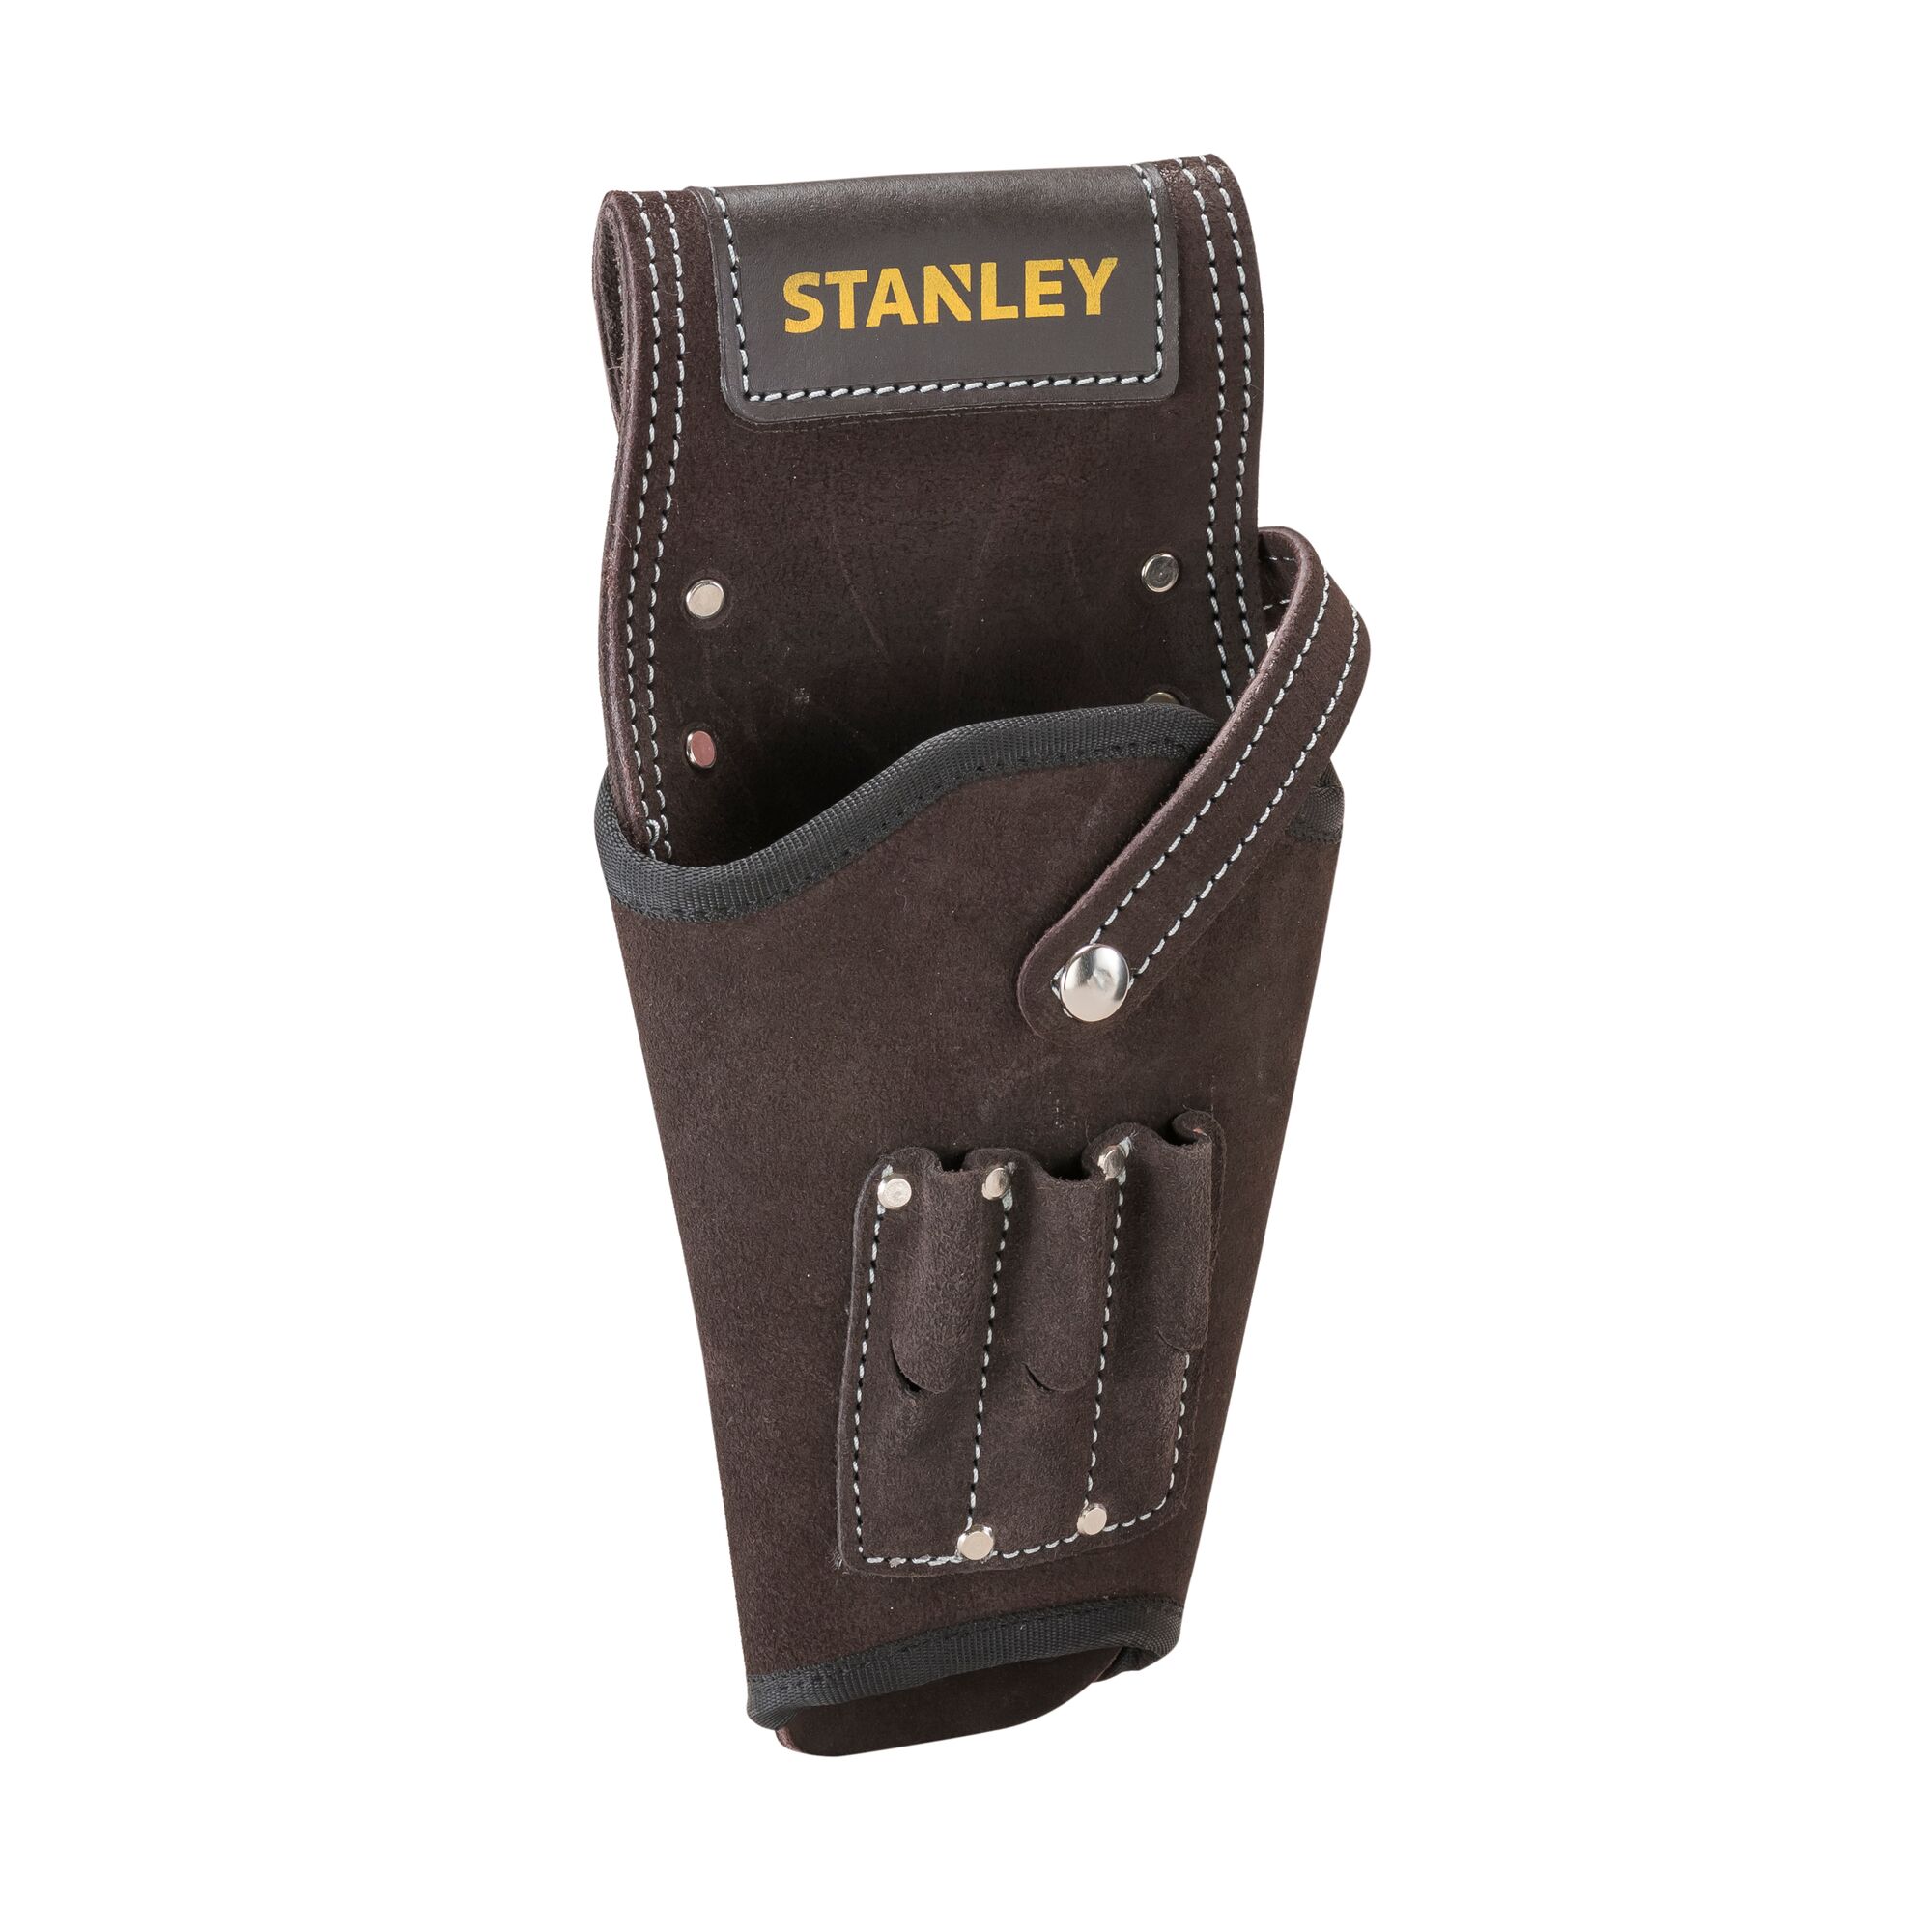 Stanley Leather Cordless Drill Impact Driver Holster Holder STA180118 